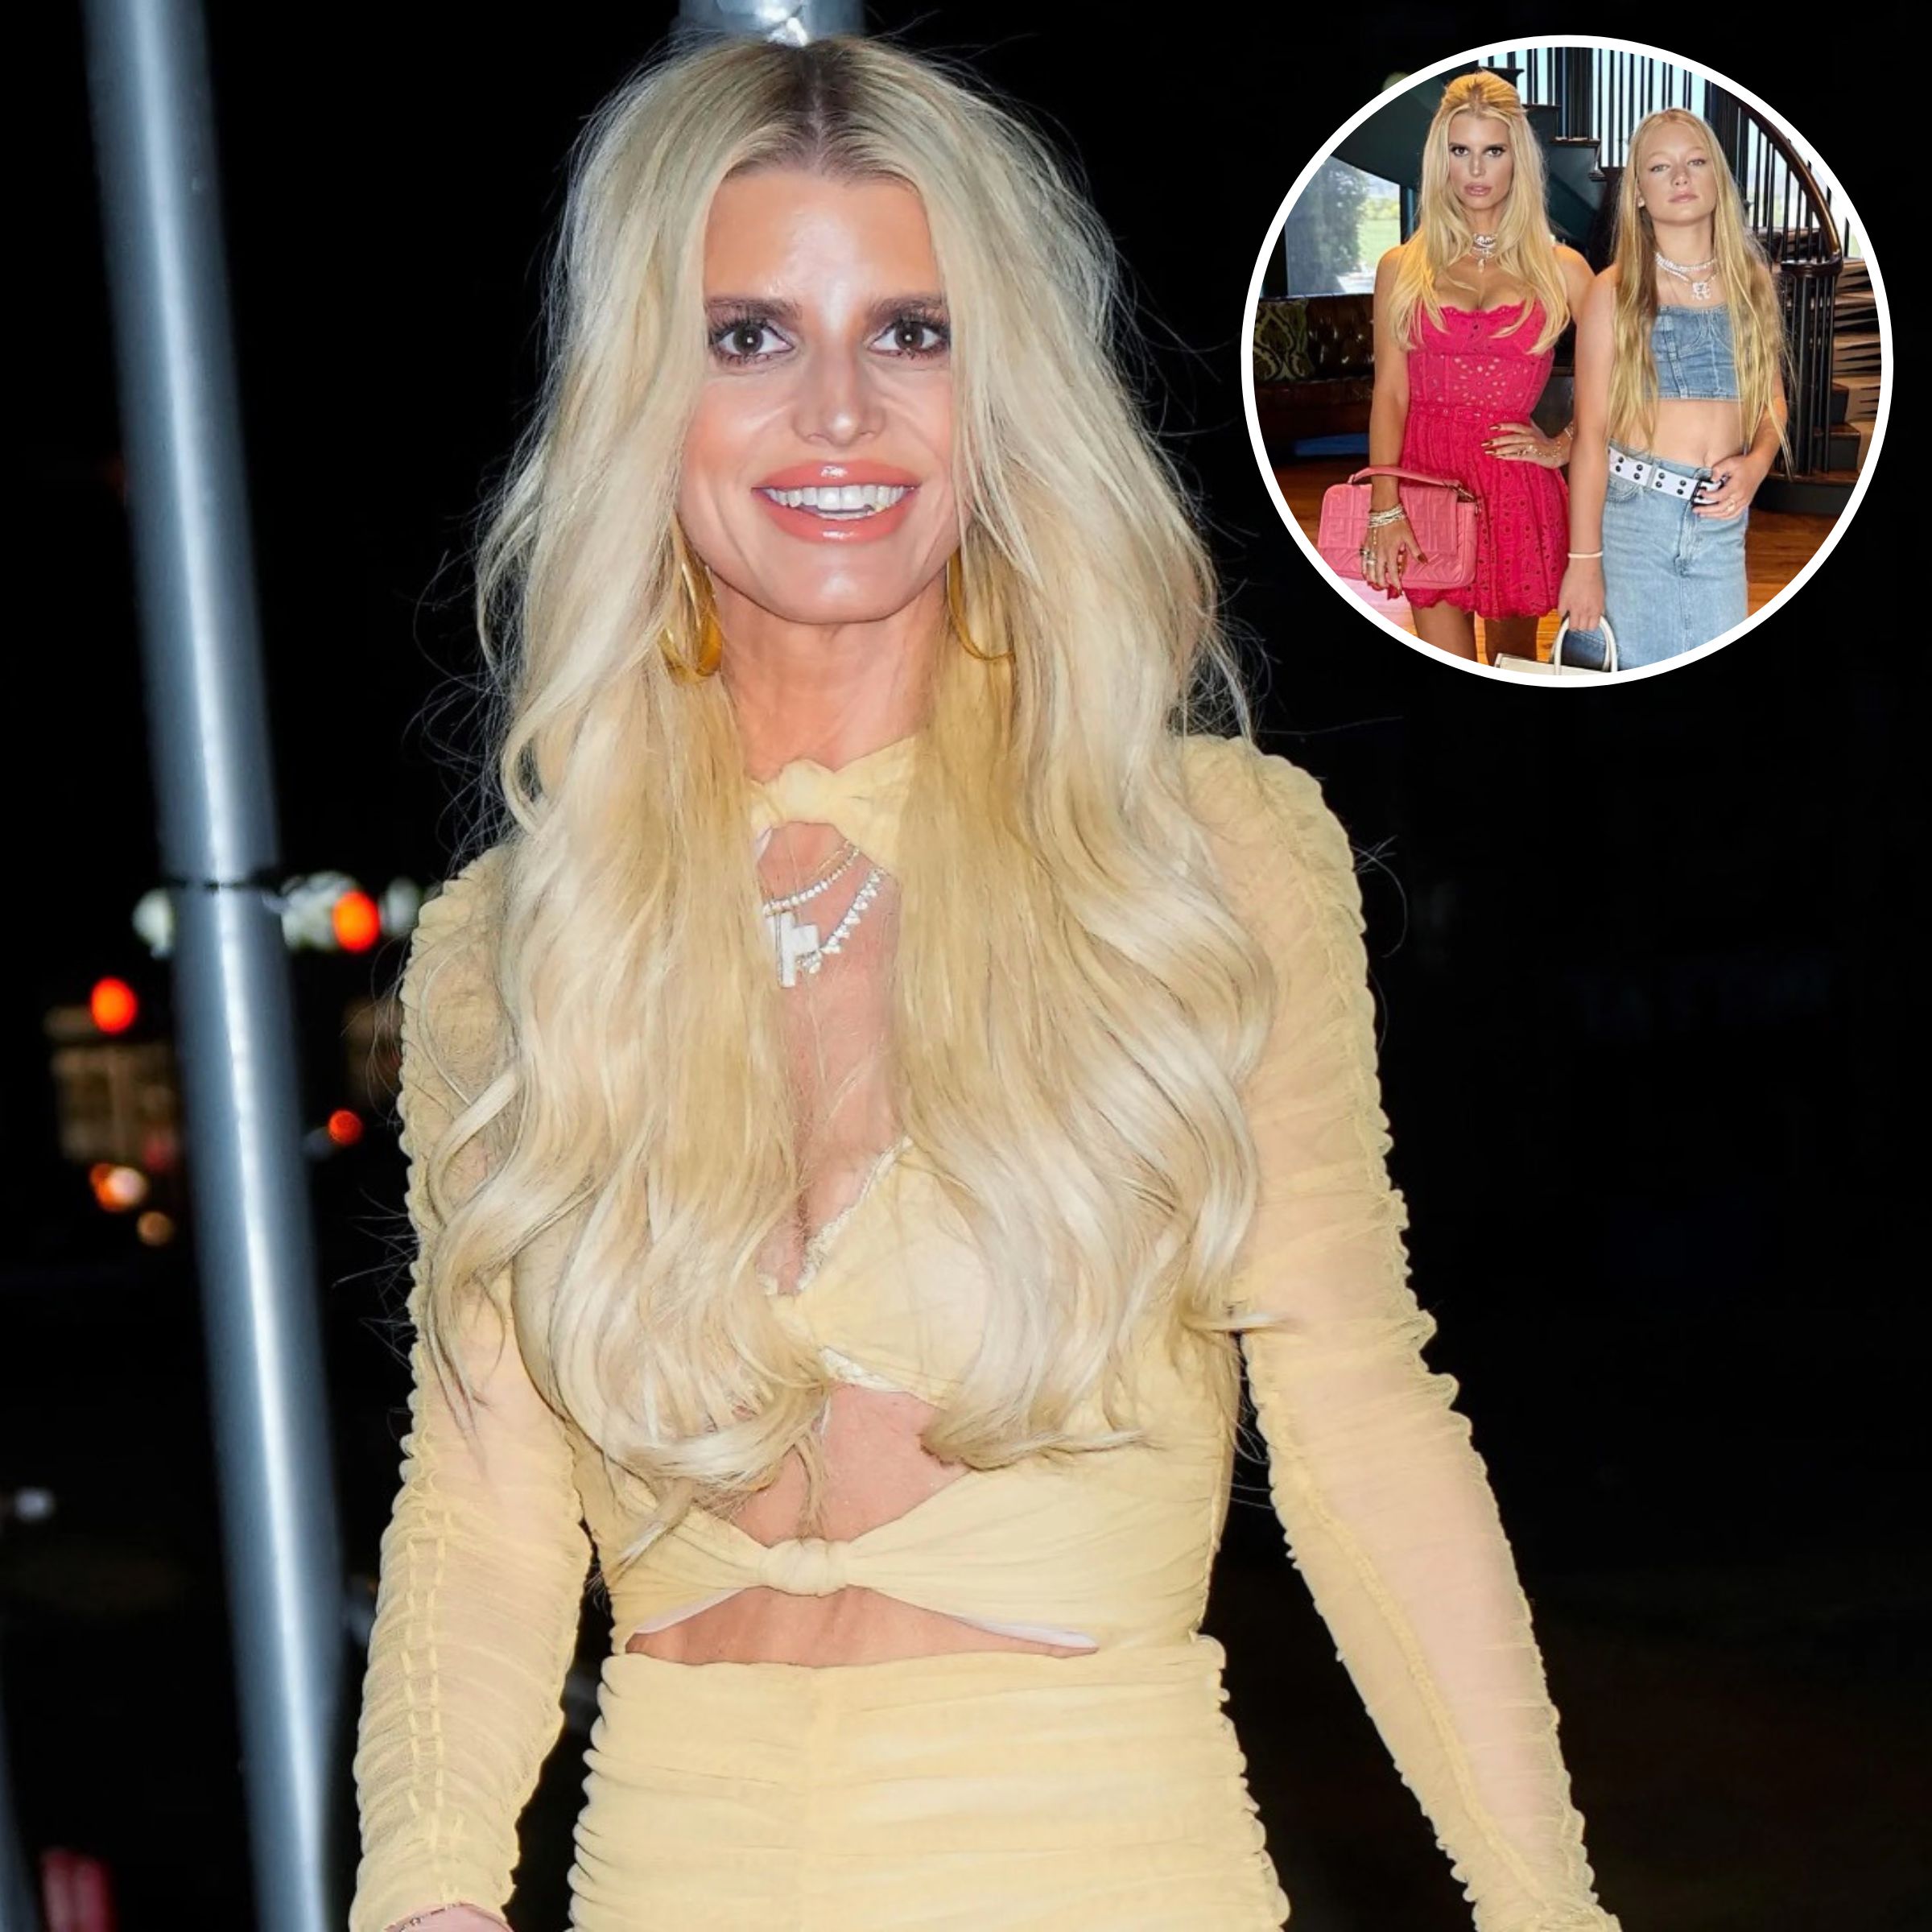 Jessica Simpson Slammed for Letting Daughter Wear Crop